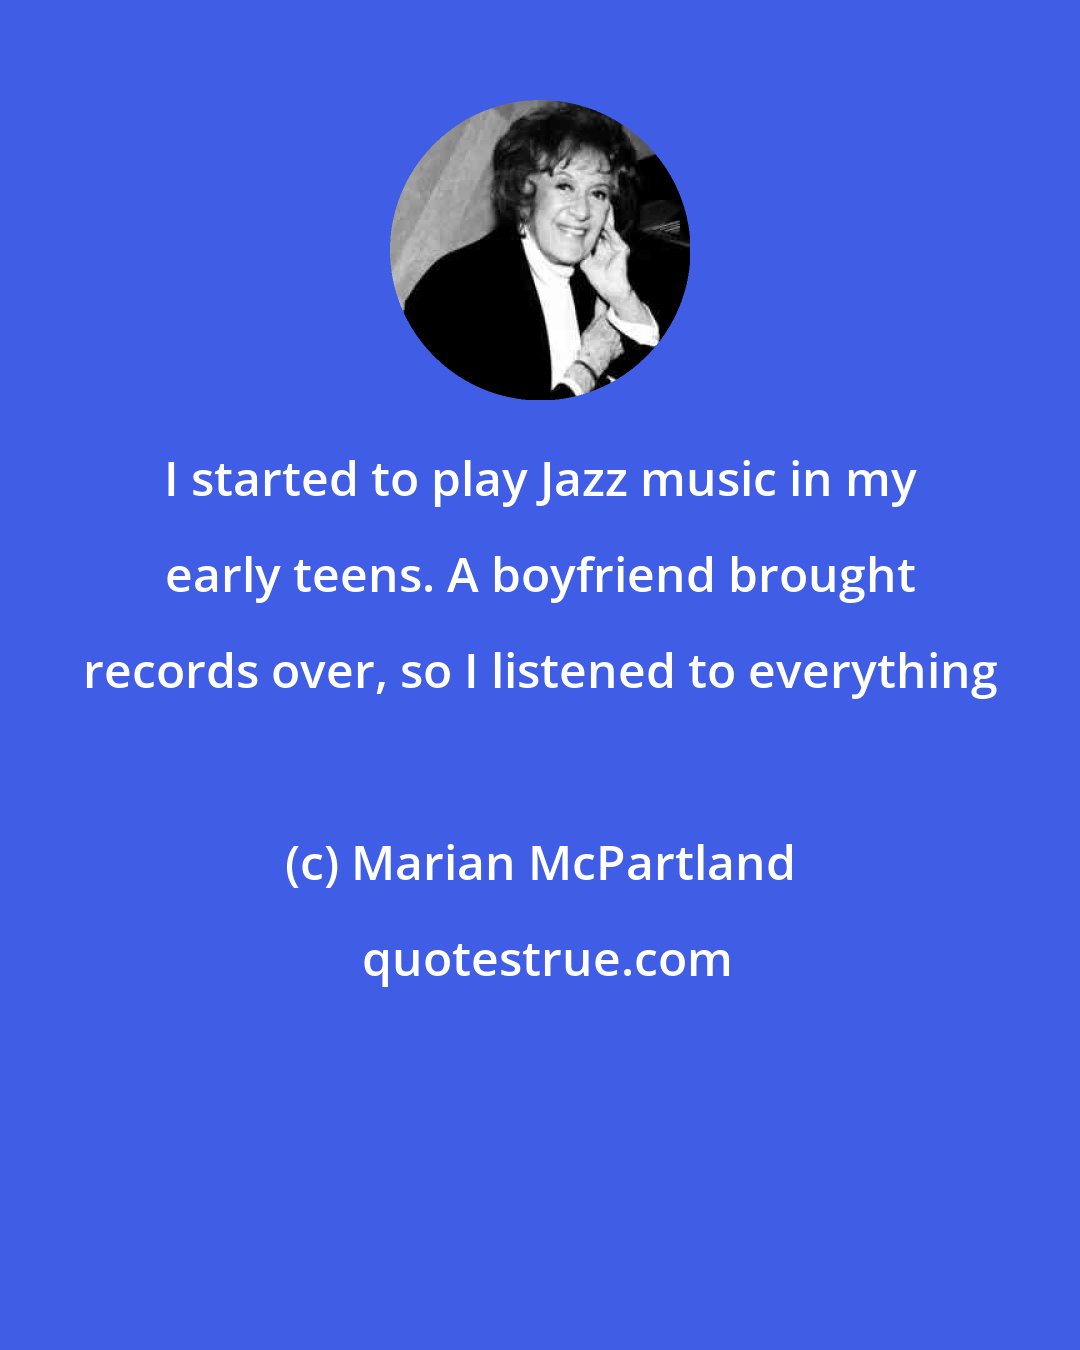 Marian McPartland: I started to play Jazz music in my early teens. A boyfriend brought records over, so I listened to everything